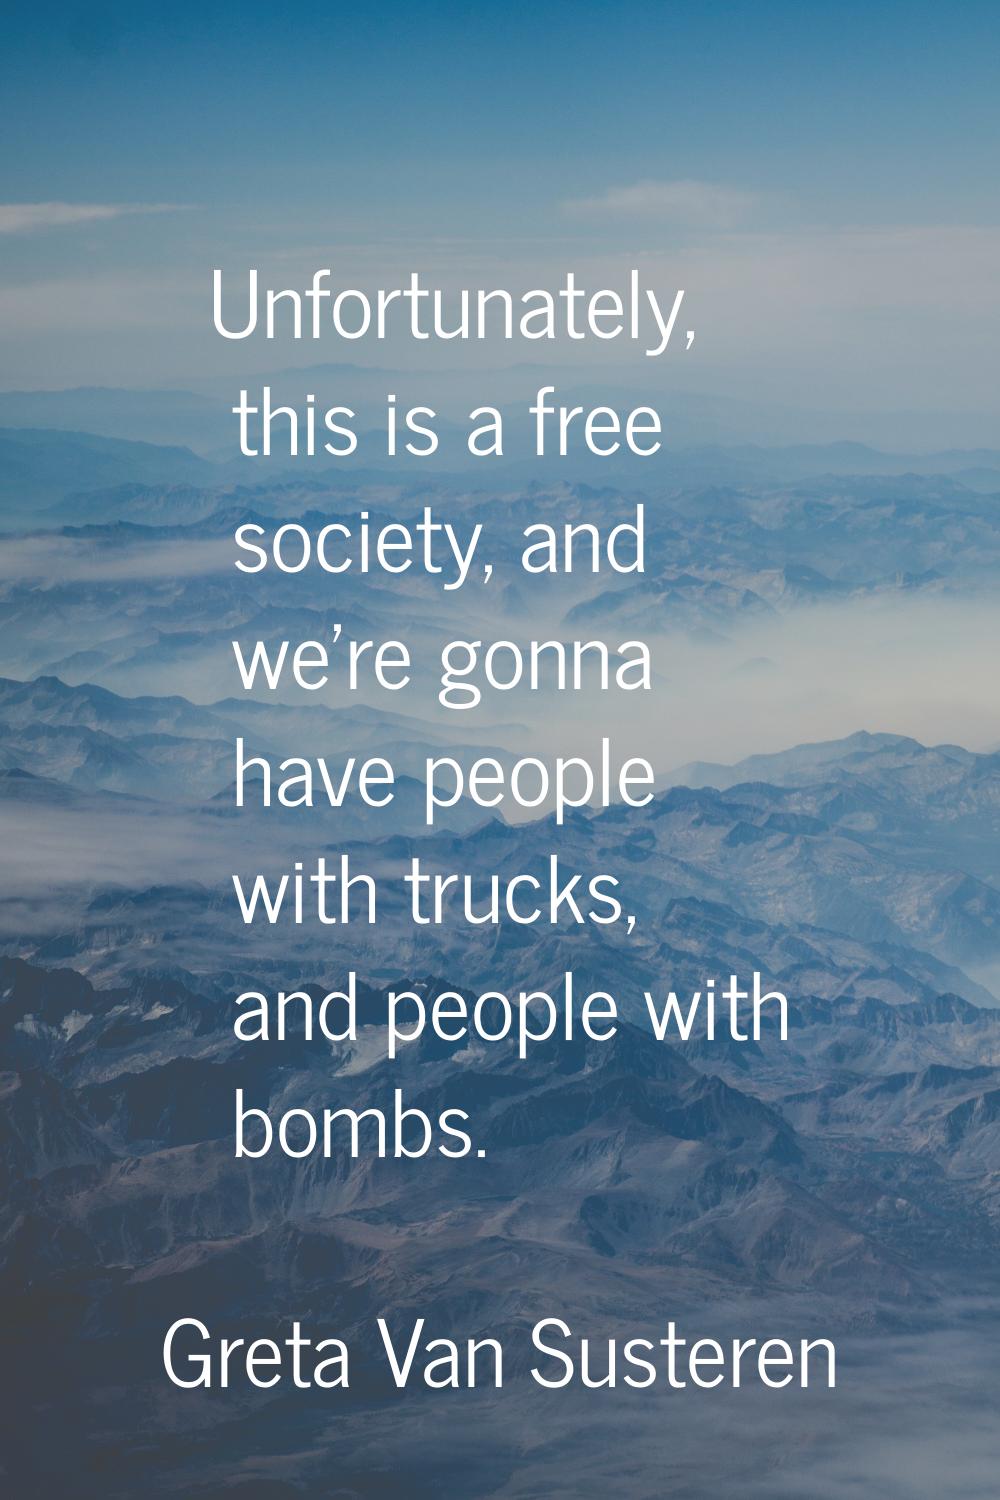 Unfortunately, this is a free society, and we're gonna have people with trucks, and people with bom